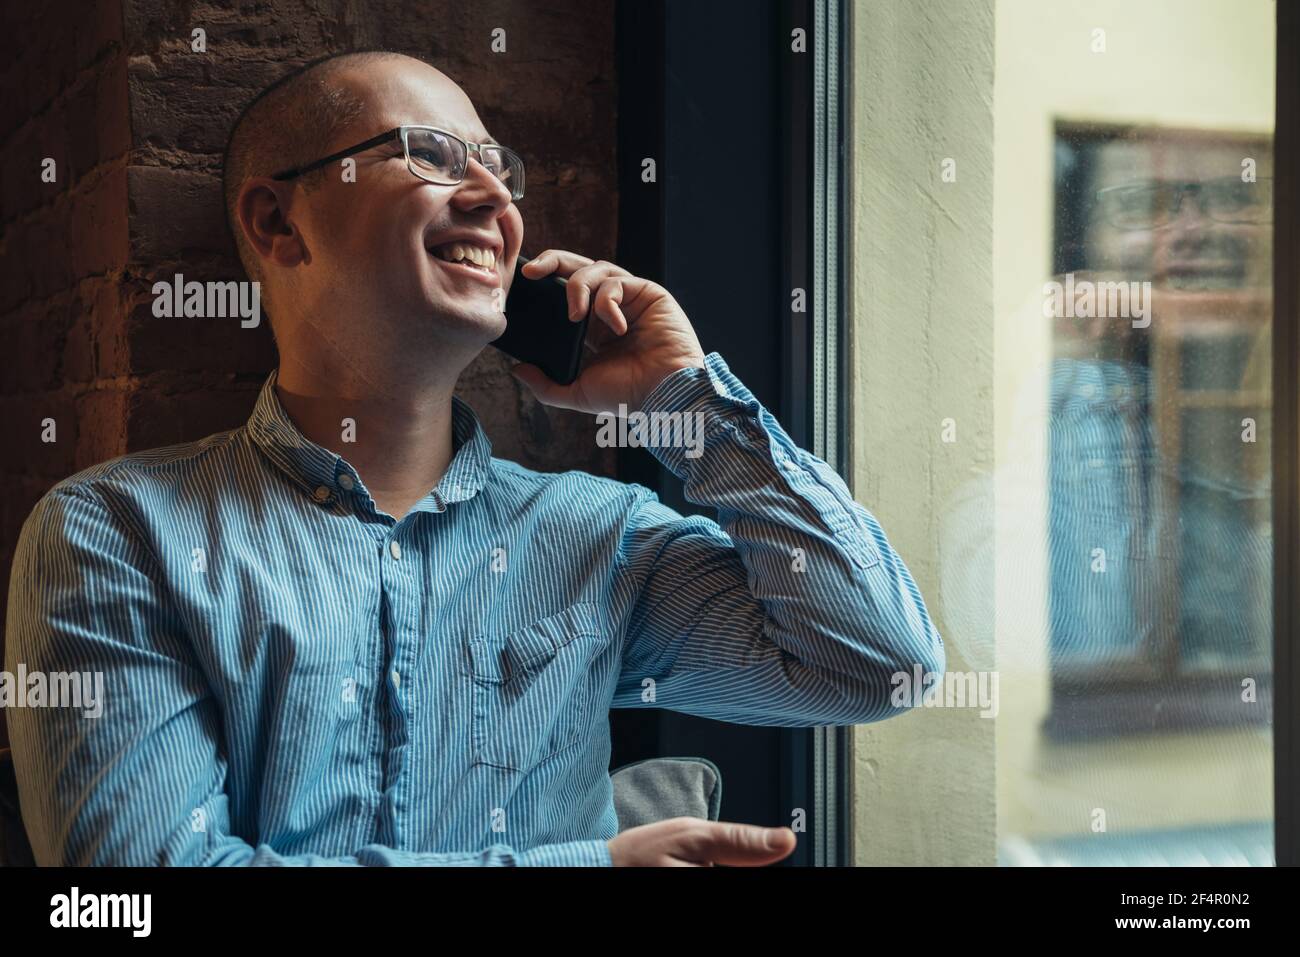 Man in a blue shirt sitting near the window and talking on smartphone. Working at home or modern coworking office. Stock Photo